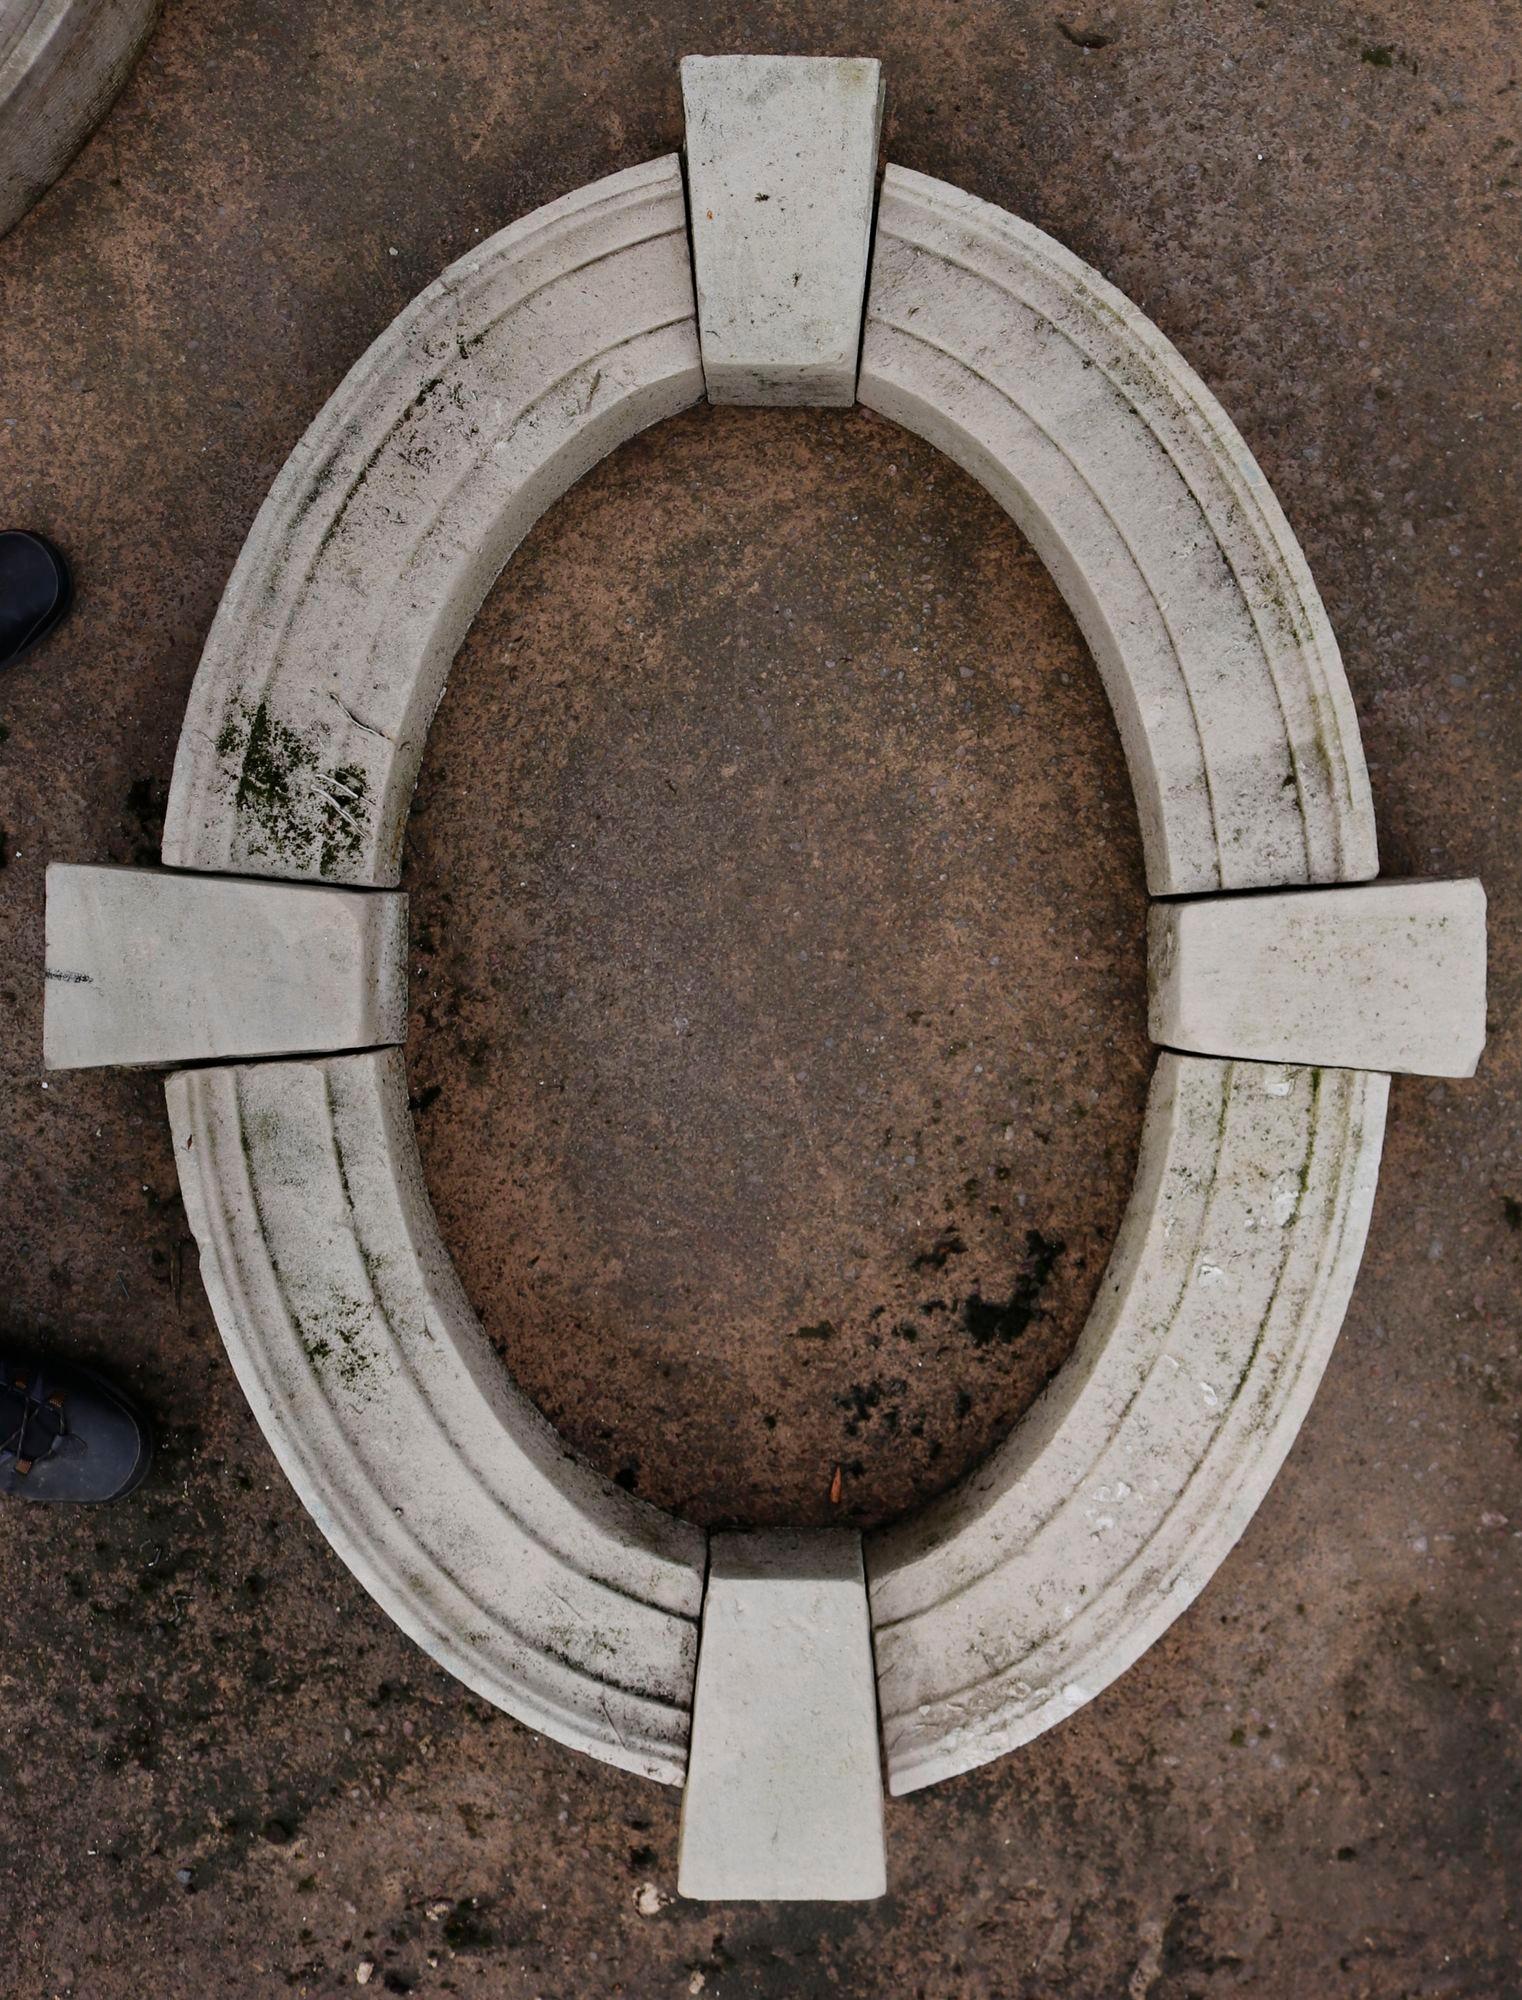 A reclaimed oval window carved from Portland limestone. We currently have four of these windows available.
Additional Dimensions:
Internal height 90 cm (35.43 in)
Internal width 60 cm (23.62 in)
Height 12- 18 cm (4.72 - 7.09 in)